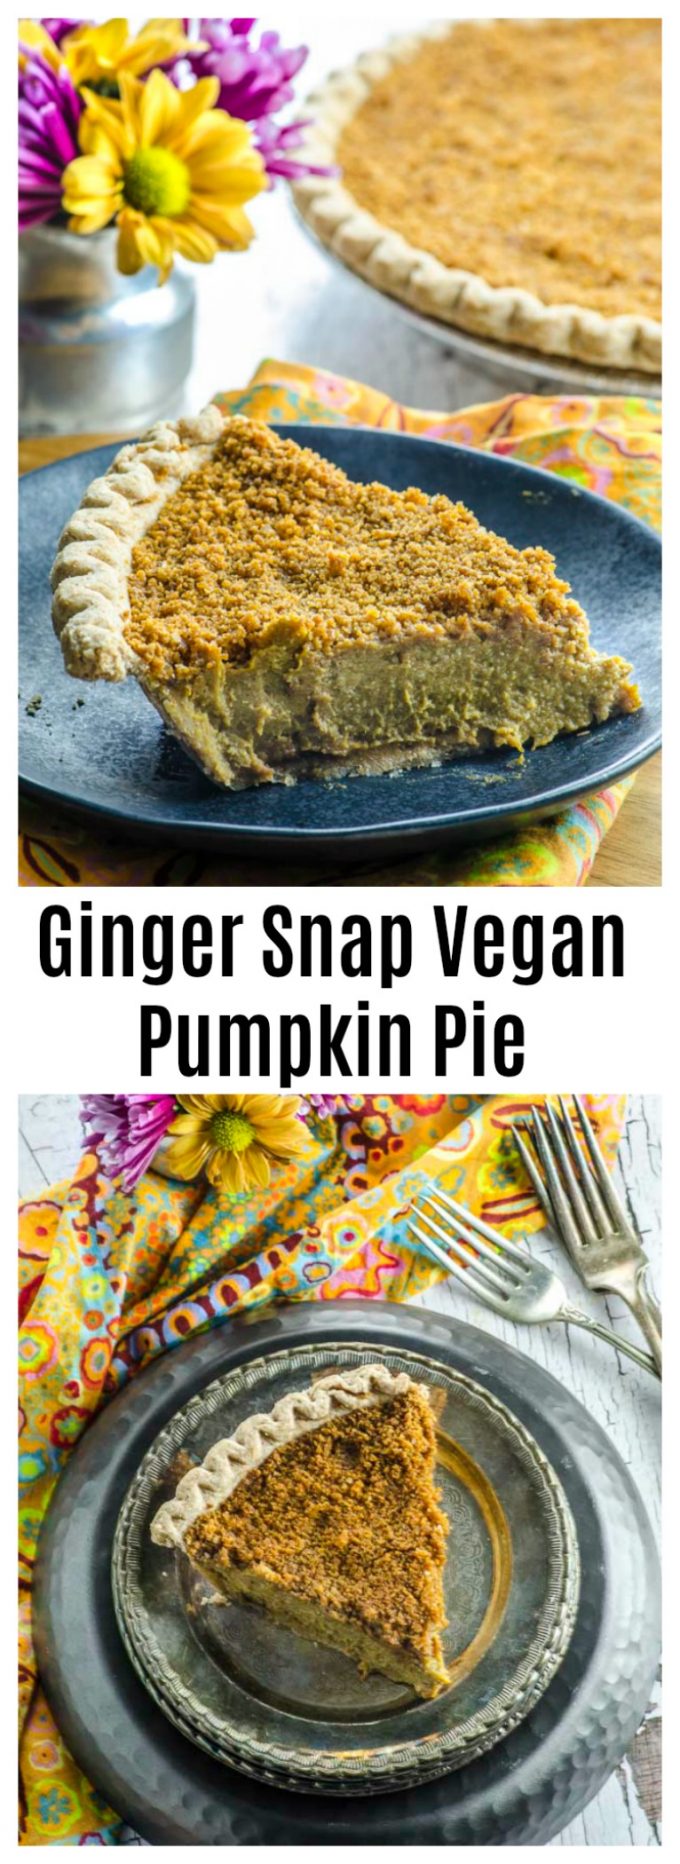 Do you wanna learn how to make vegan pumpkin pie from scratch? Check out this super easy recipe. So rich and creamy, who needs eggs or evaporated milk?